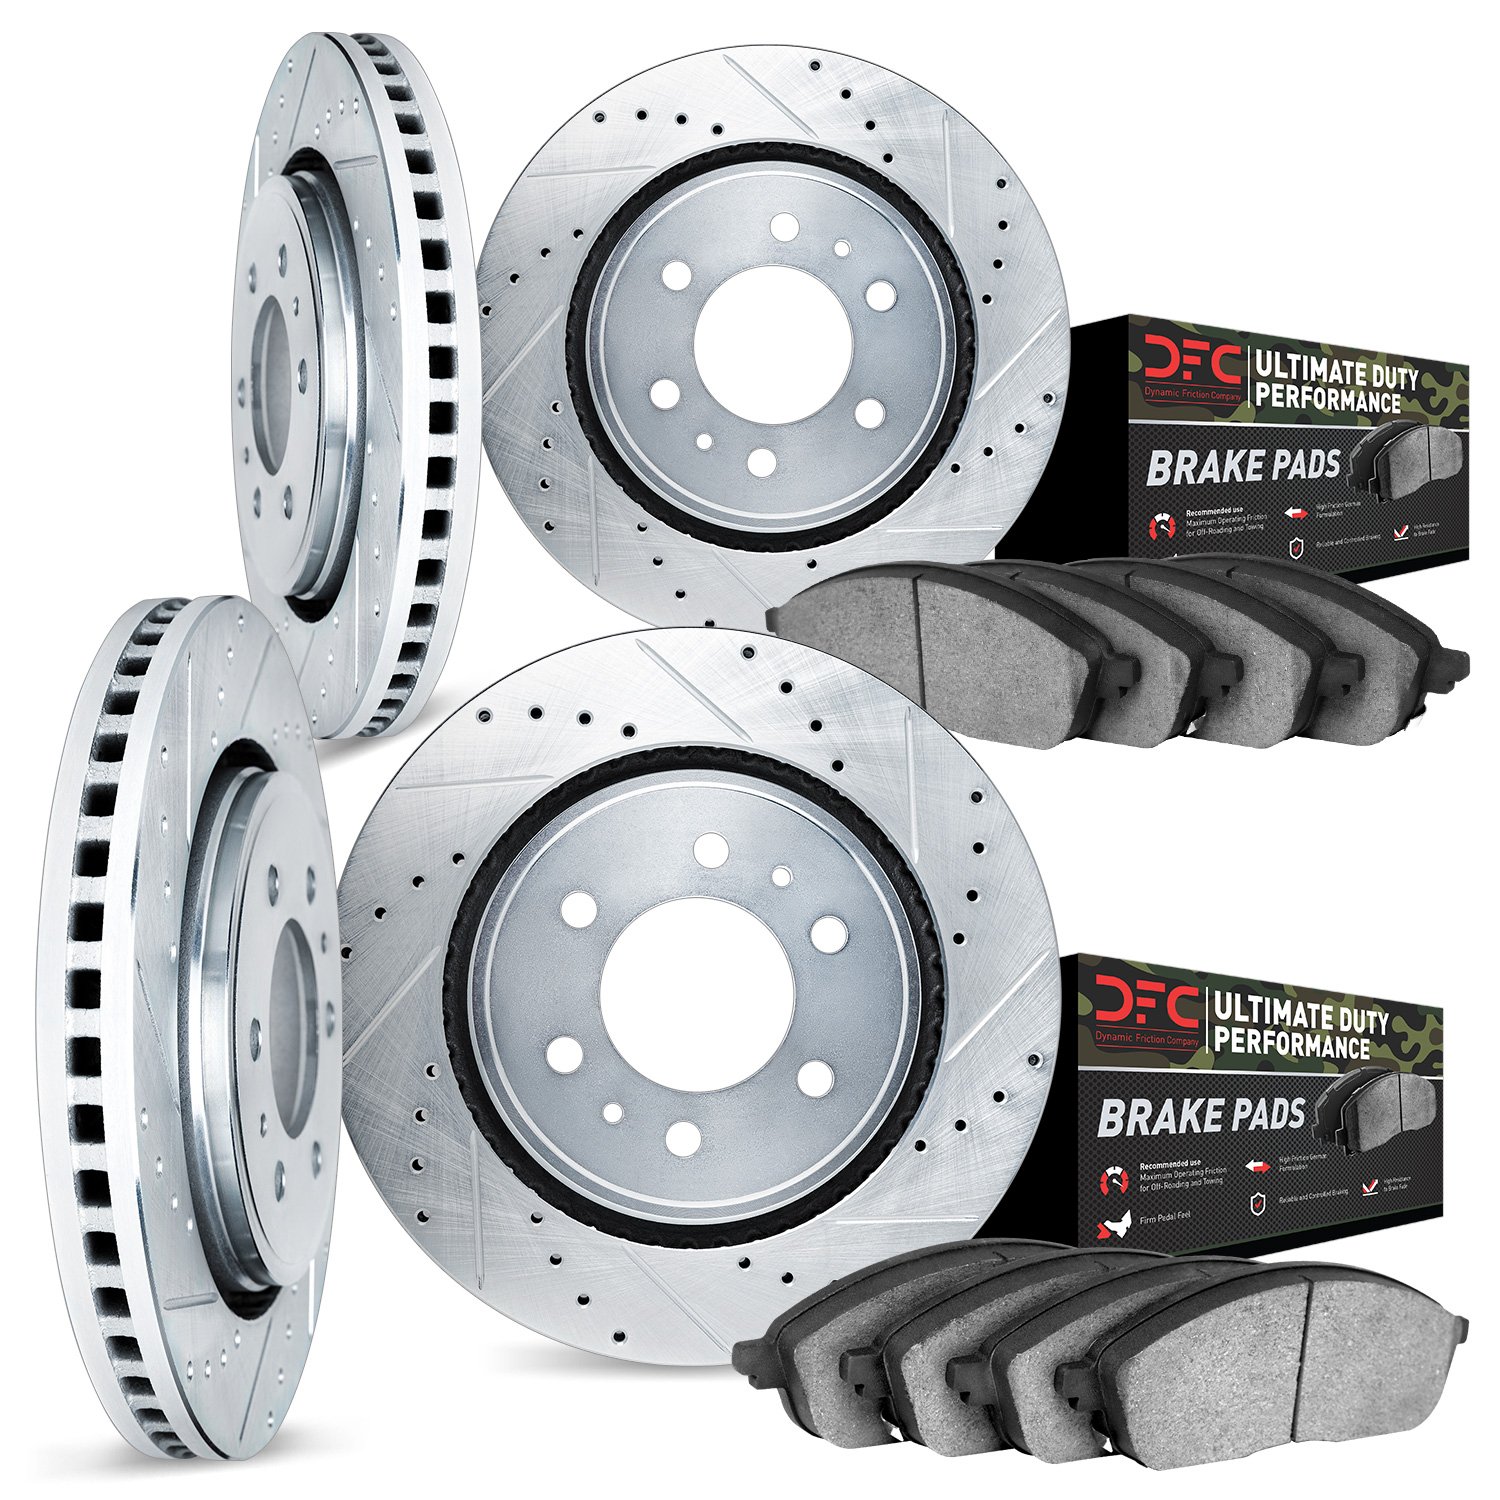 7404-76004 Drilled/Slotted Brake Rotors with Ultimate-Duty Brake Pads Kit [Silver], 2003-2009 Lexus/Toyota/Scion, Position: Fron